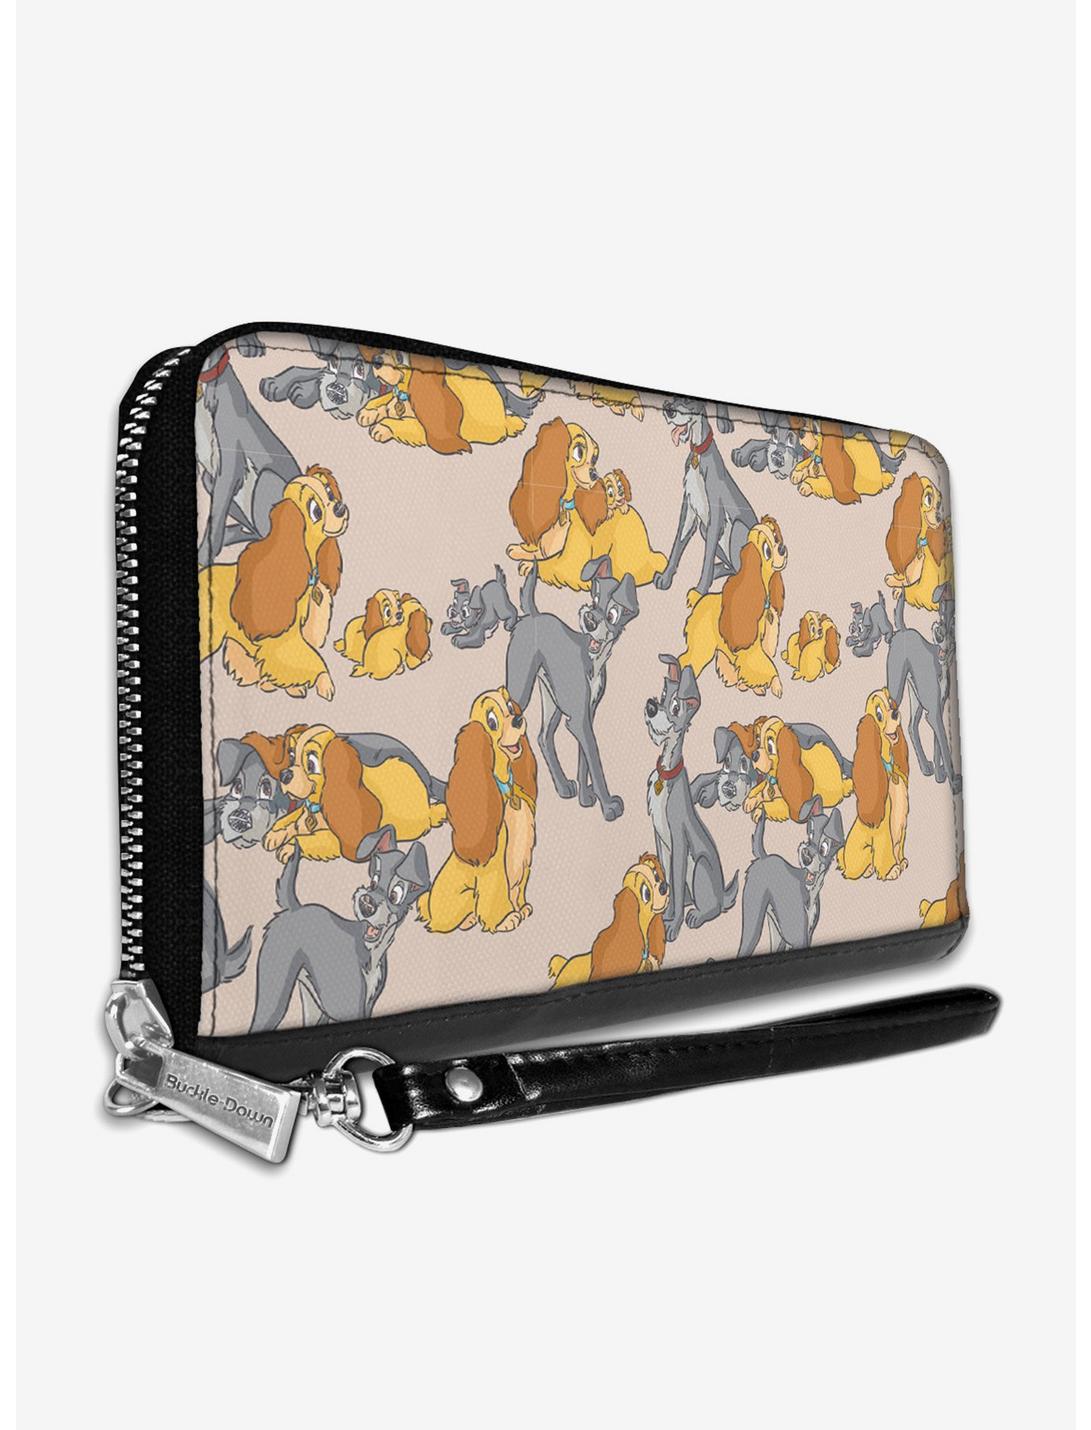 Disney Lady and the Tramp with Puppies Zip Around Wallet, , hi-res